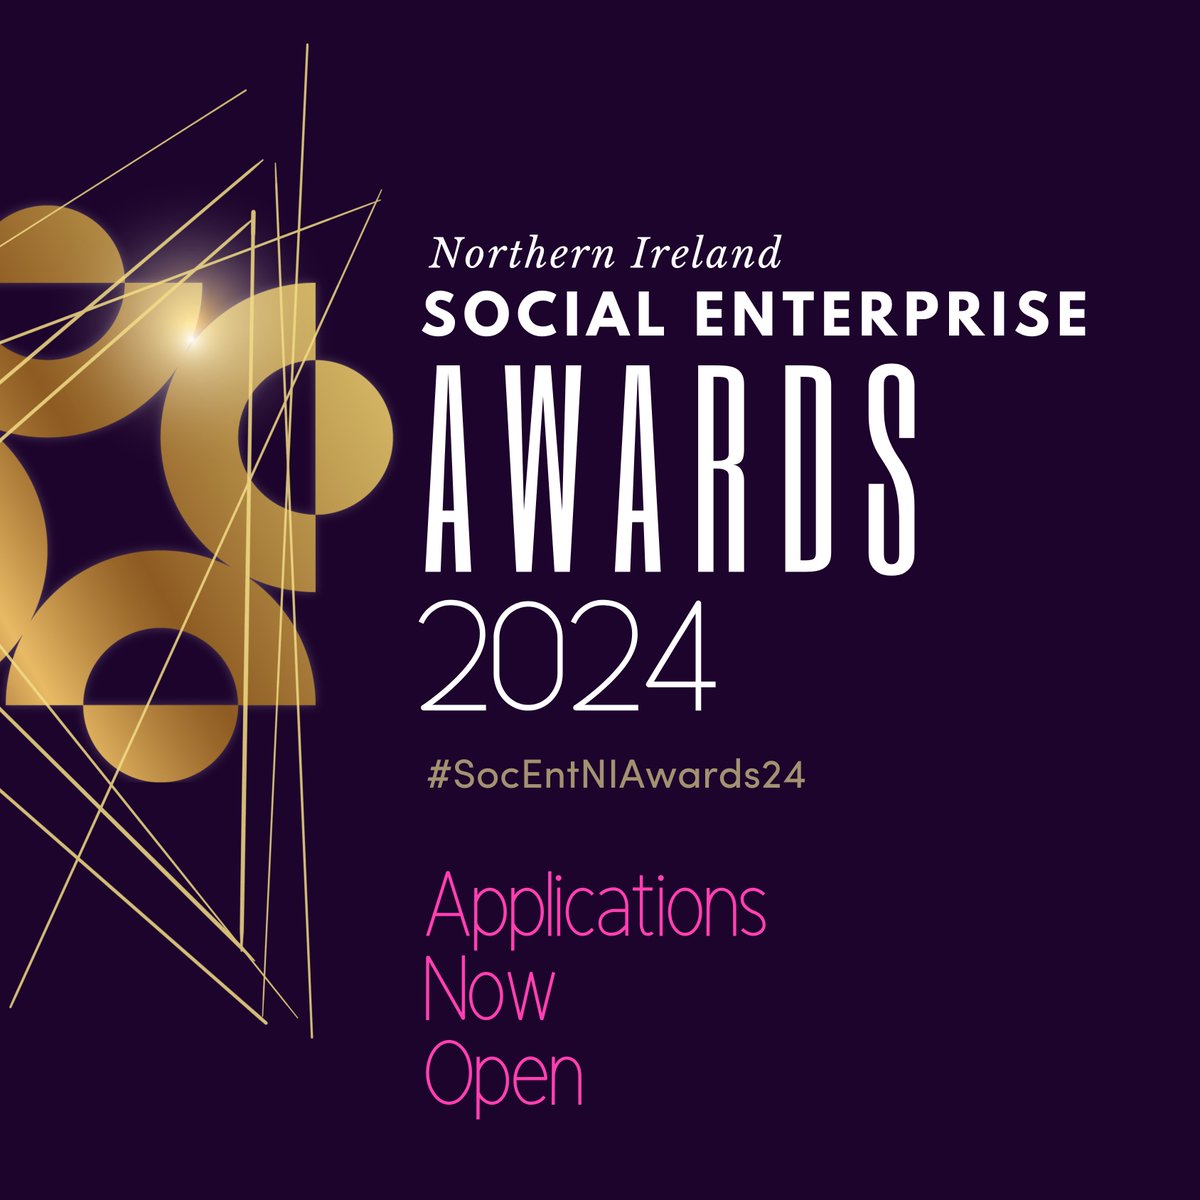 ⭐APPLICATIONS NOW OPEN⭐

Get your entries in now for our 2024 Northern Ireland Social Enterprise Awards!

We can't wait to see who our winners will be.
Good Luck to everyone😄

#SocEntNIAwards24 #SocialEnterprise #NorthernIrelandBusinesses #AwardsSeason #SocEntNI